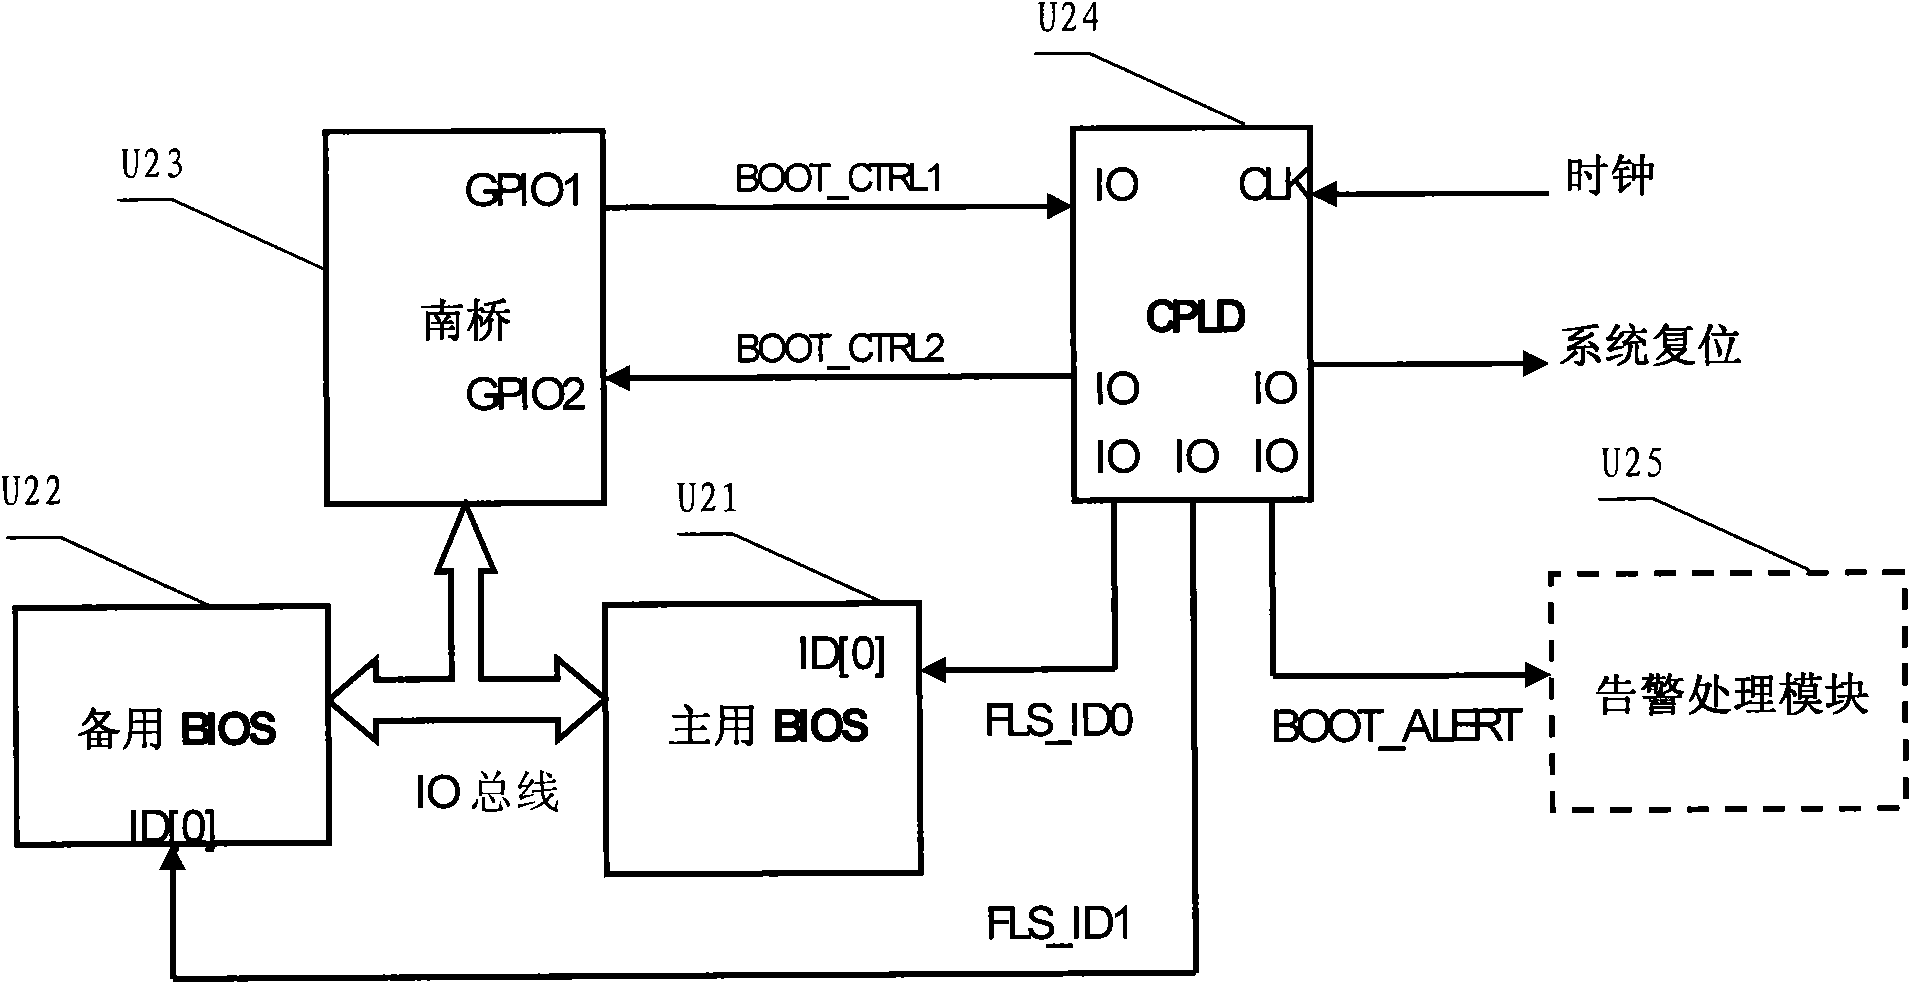 Device and method for switching BIOS (Basic Input/Output System)